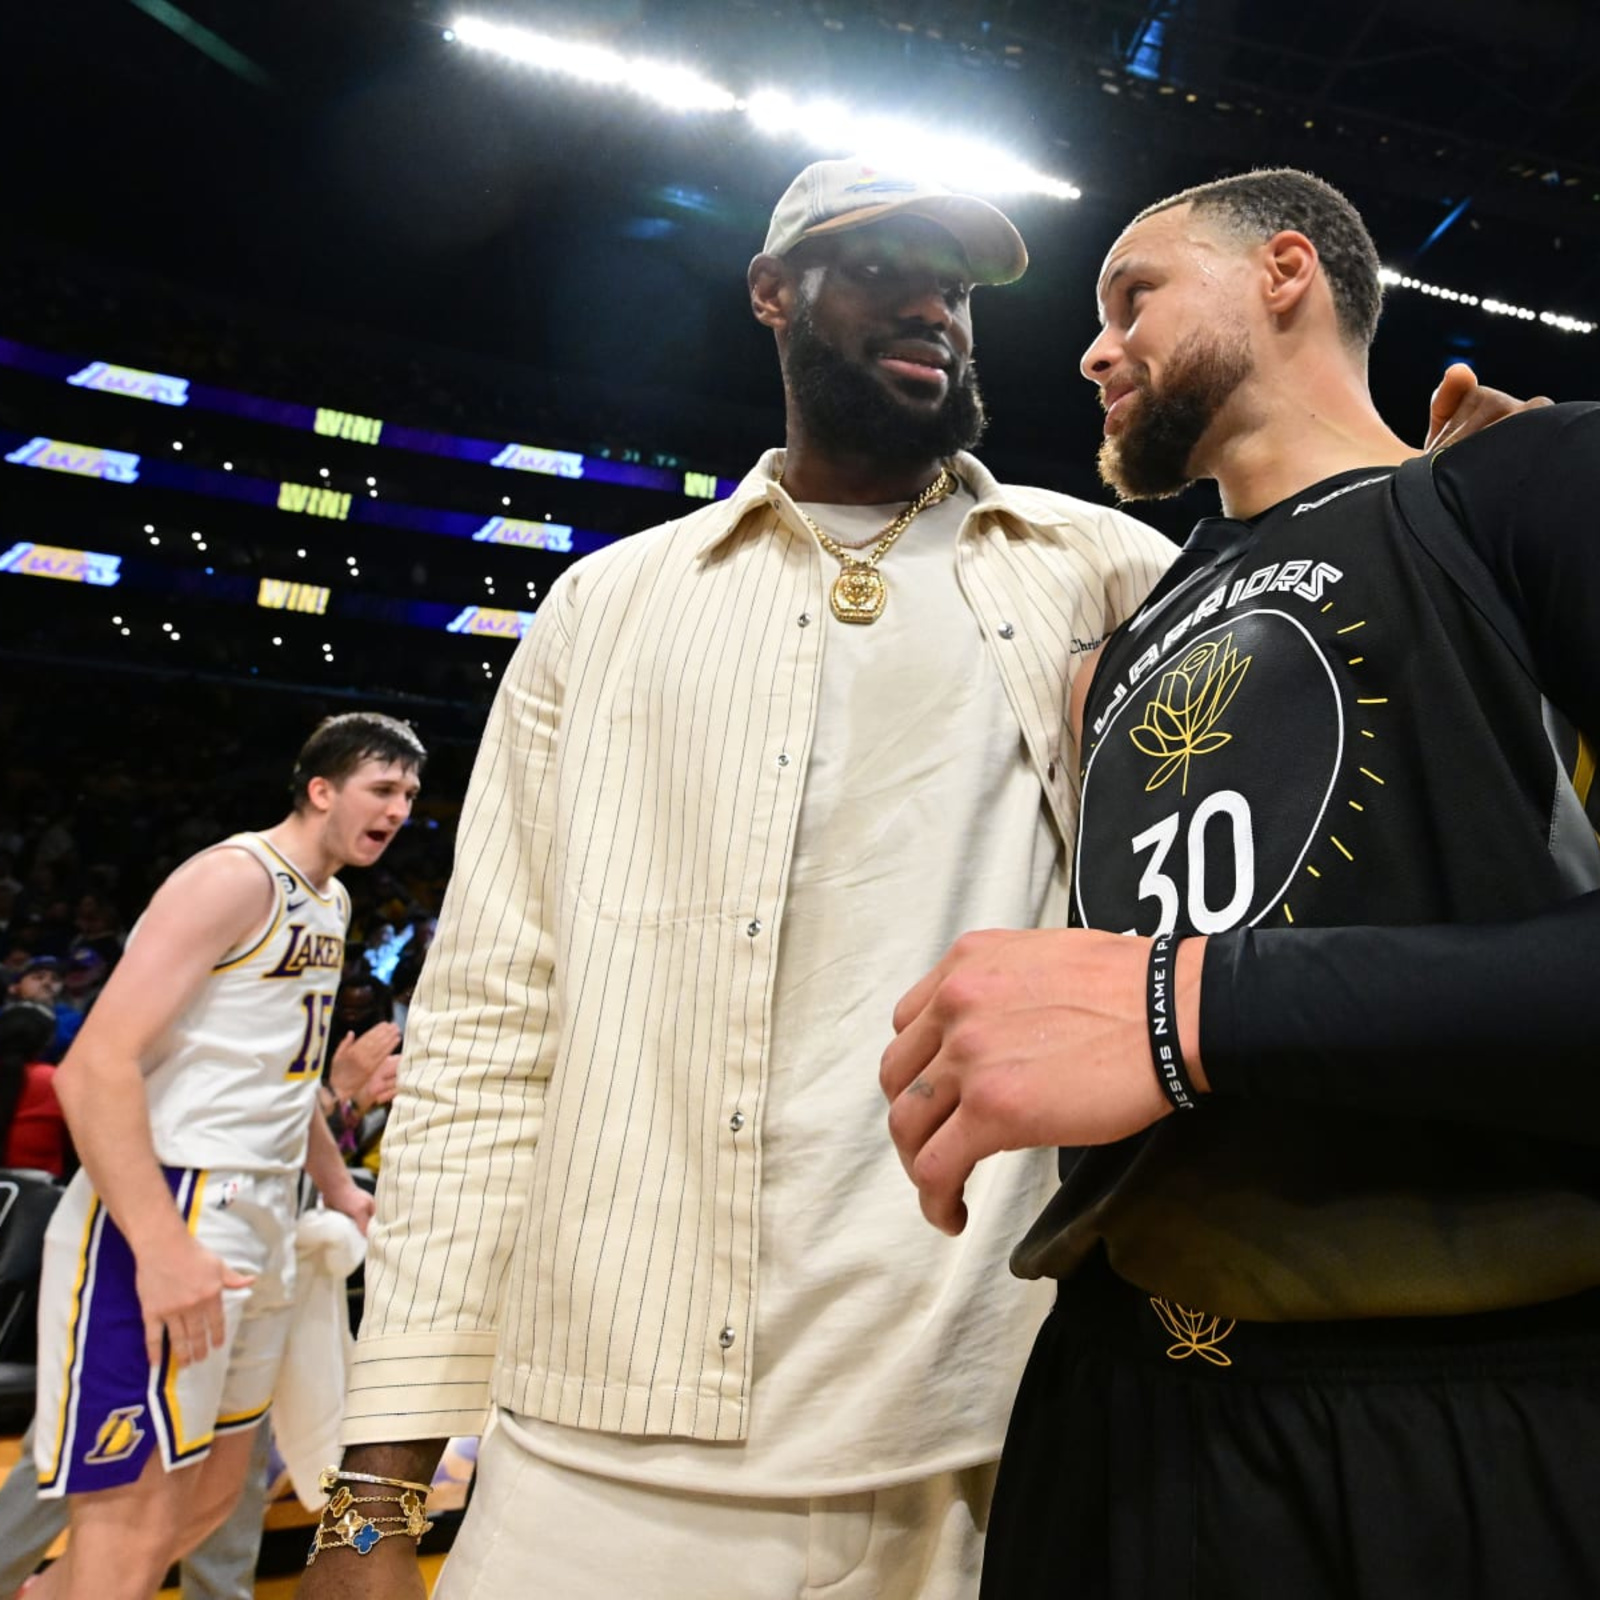 LeBron James savors Lakers win, rivalry with Steph Curry - Los